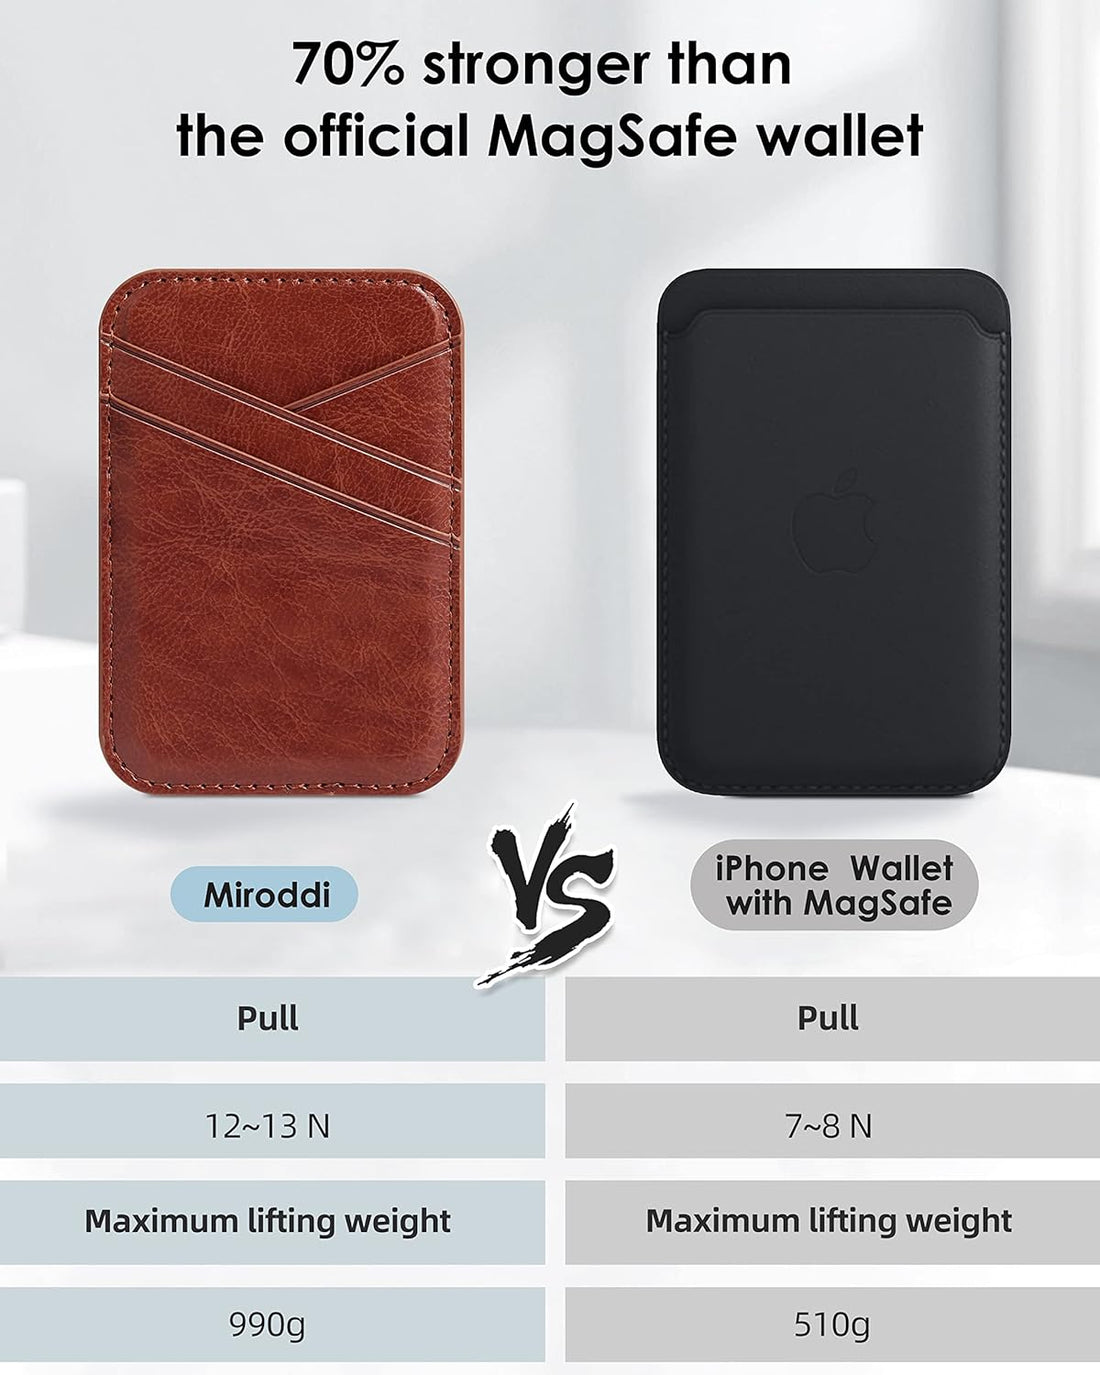 New Upgrade - Compatible with iPhone 13 and iPhone 12 Magsafe Wallet, MagSafe Leather Wallet, Magnetic Card Holder for Back of iPhone 13 and iPhone 12 Series, Brown